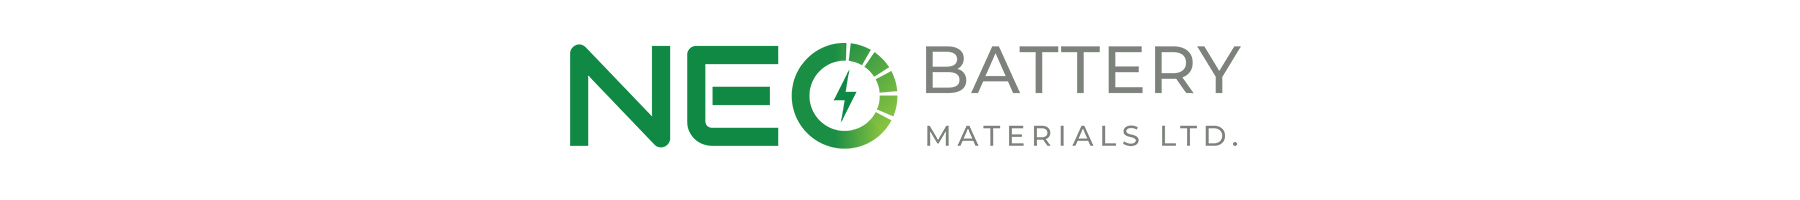 NEO Battery Materials Launches NBM America LLC in U.S. and Announces Participation in InterBattery 2023, South Korea’s Leading Battery Conference | NEO Battery Materials Ltd.